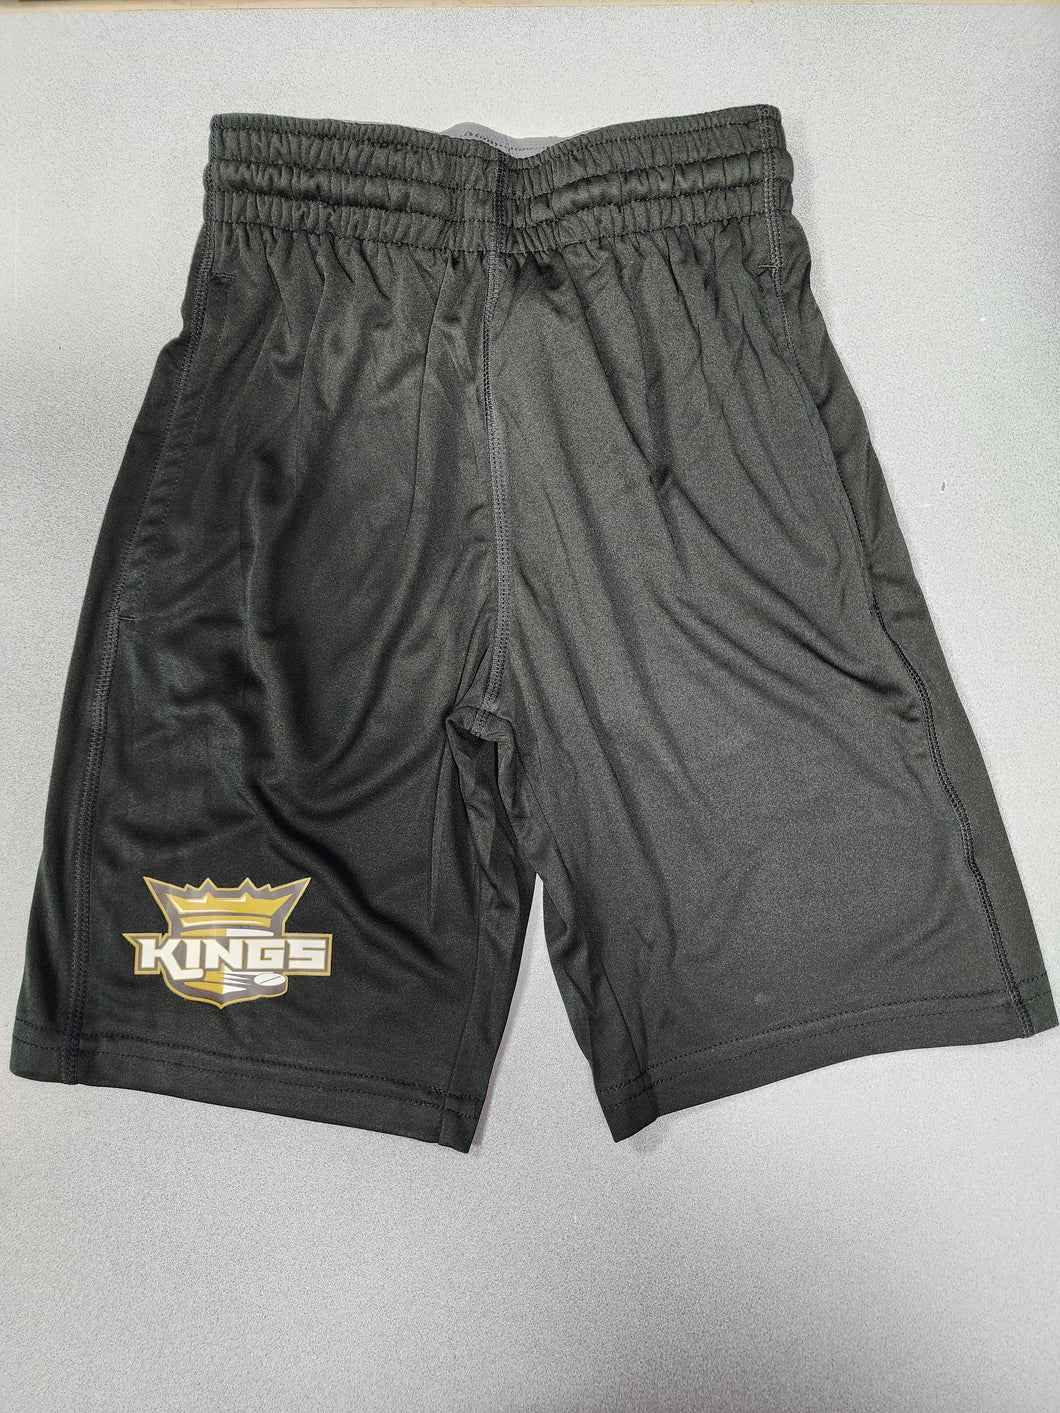 King's Adult Performance Shorts